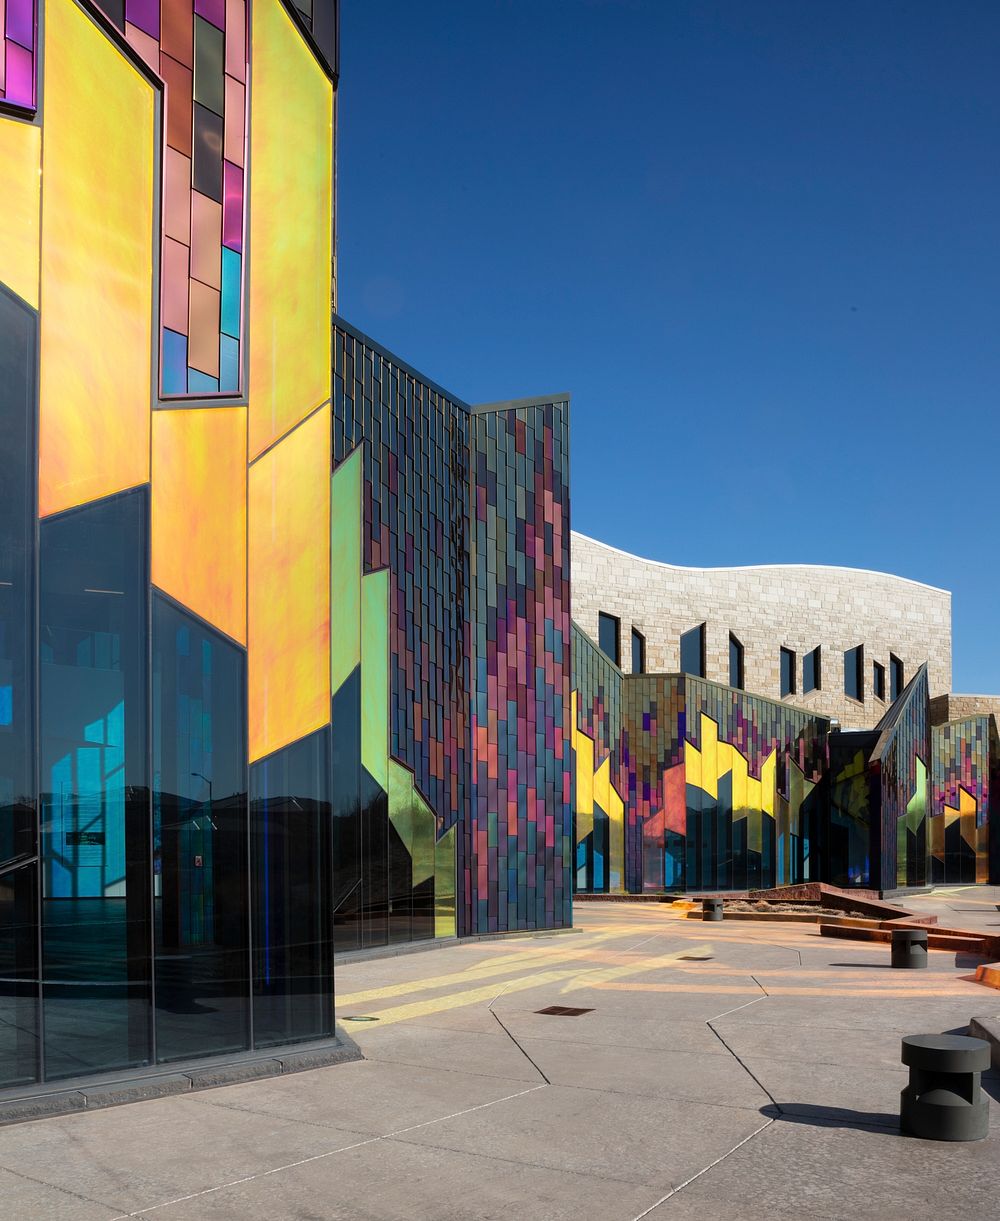                         The colorful walls of the Museum at Prairiefire in Overland, Kansas, a Kansas City suburb, change…